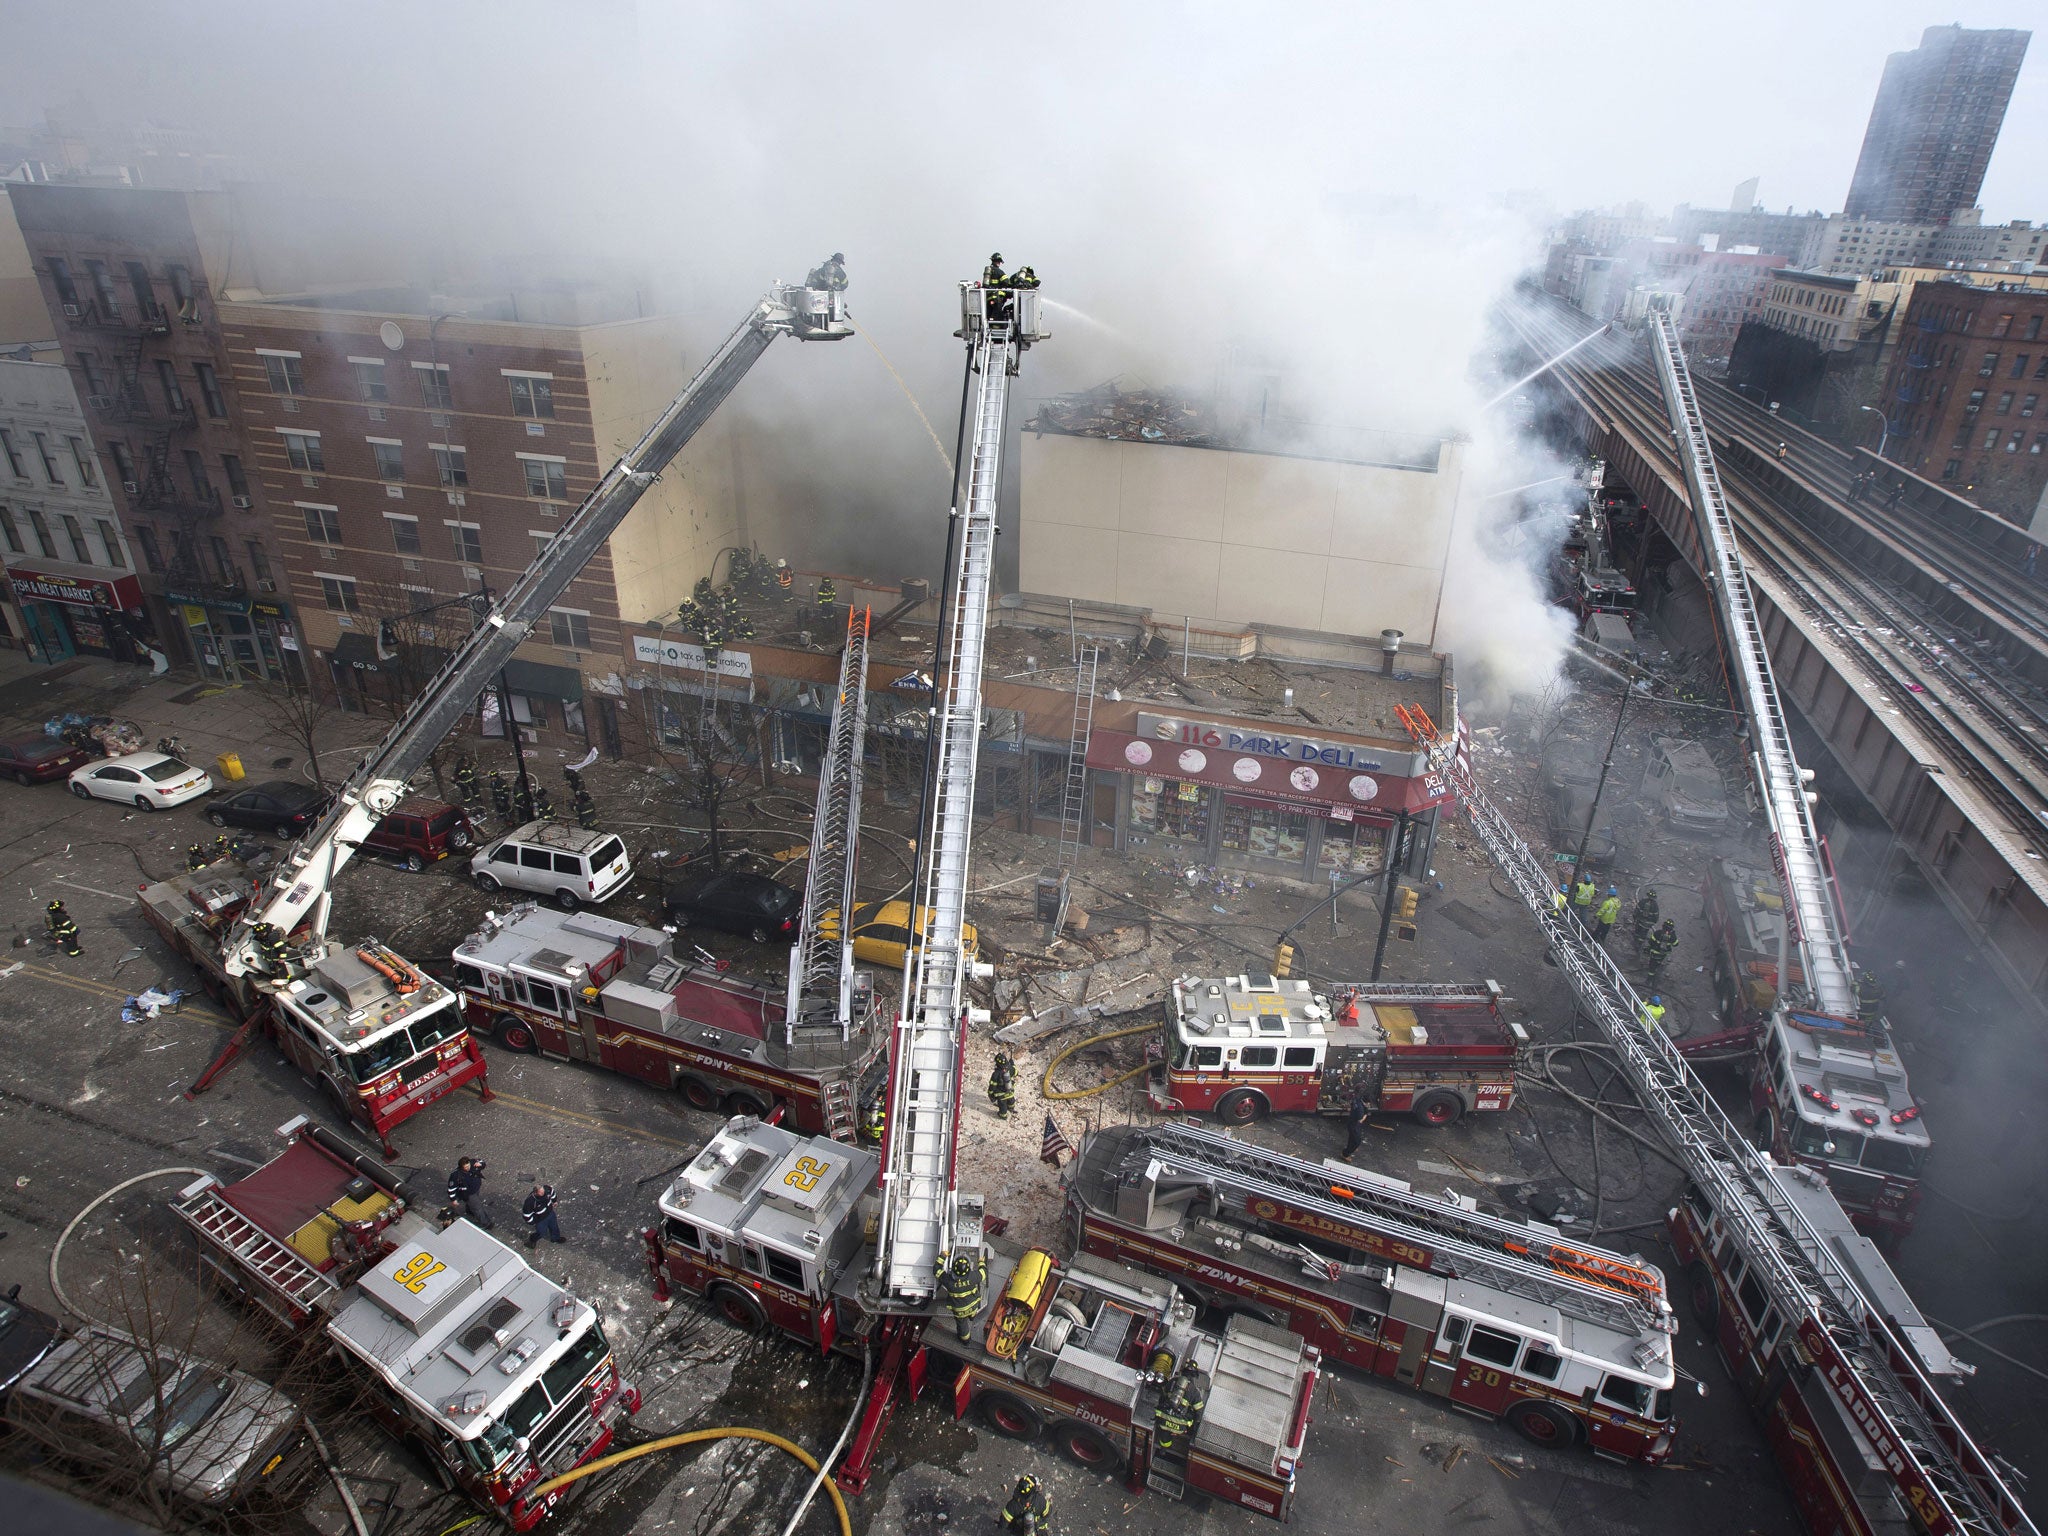 Firefighters battle a fire after a building collapse in the East Harlem neighborhood of New York